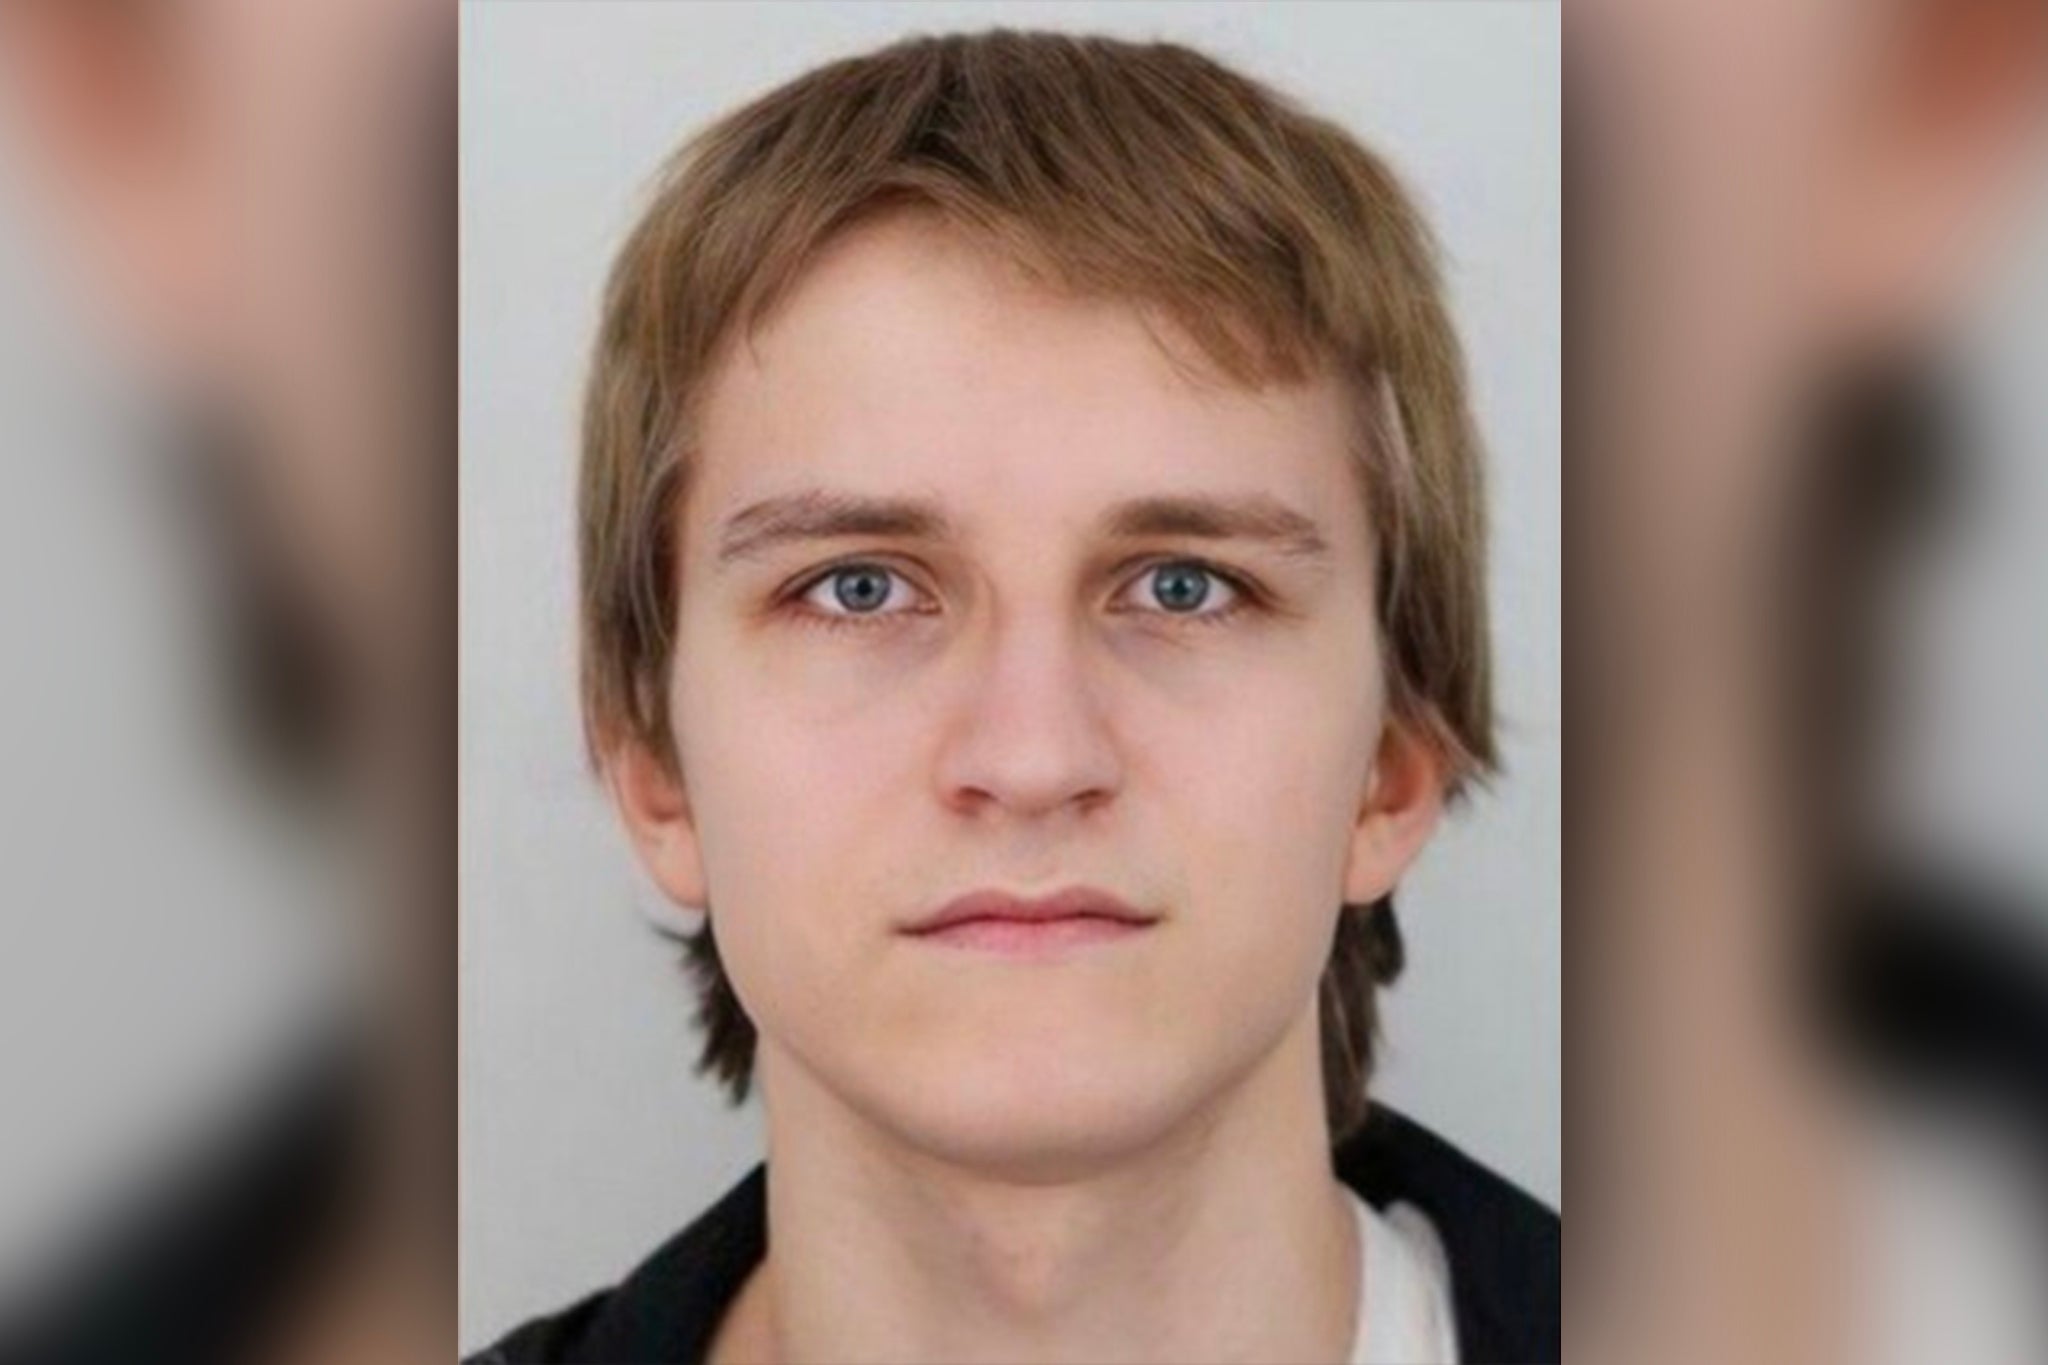 David Kozák has been named as the shooter who opened fire at a Prague university